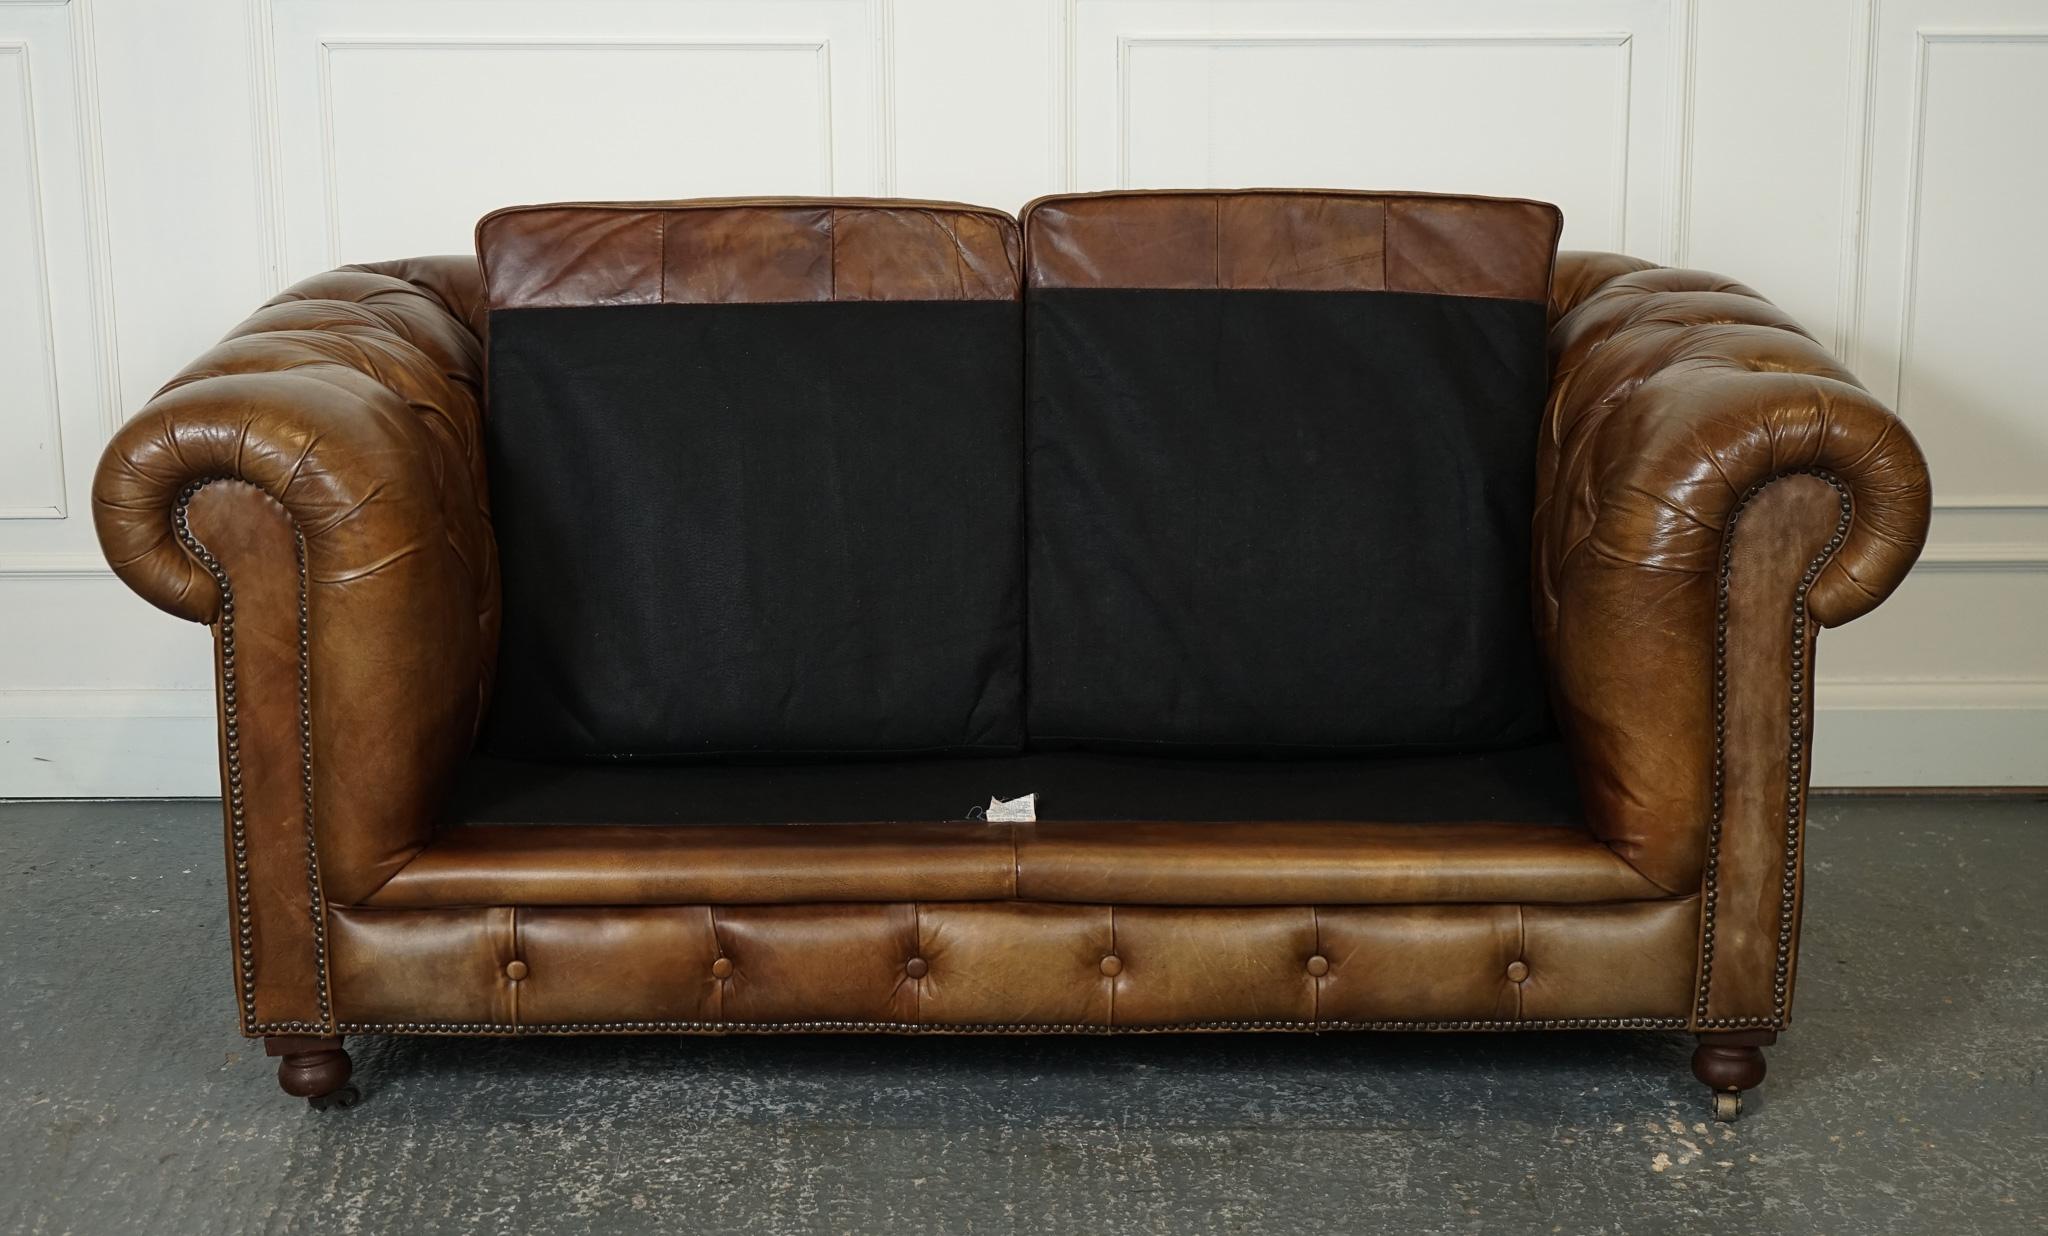 GORGEOUS TIMOTHY OULTON CHESTERFIELD SOFA BY HALO HERiTAGE BROWN LEATHER J1 For Sale 4